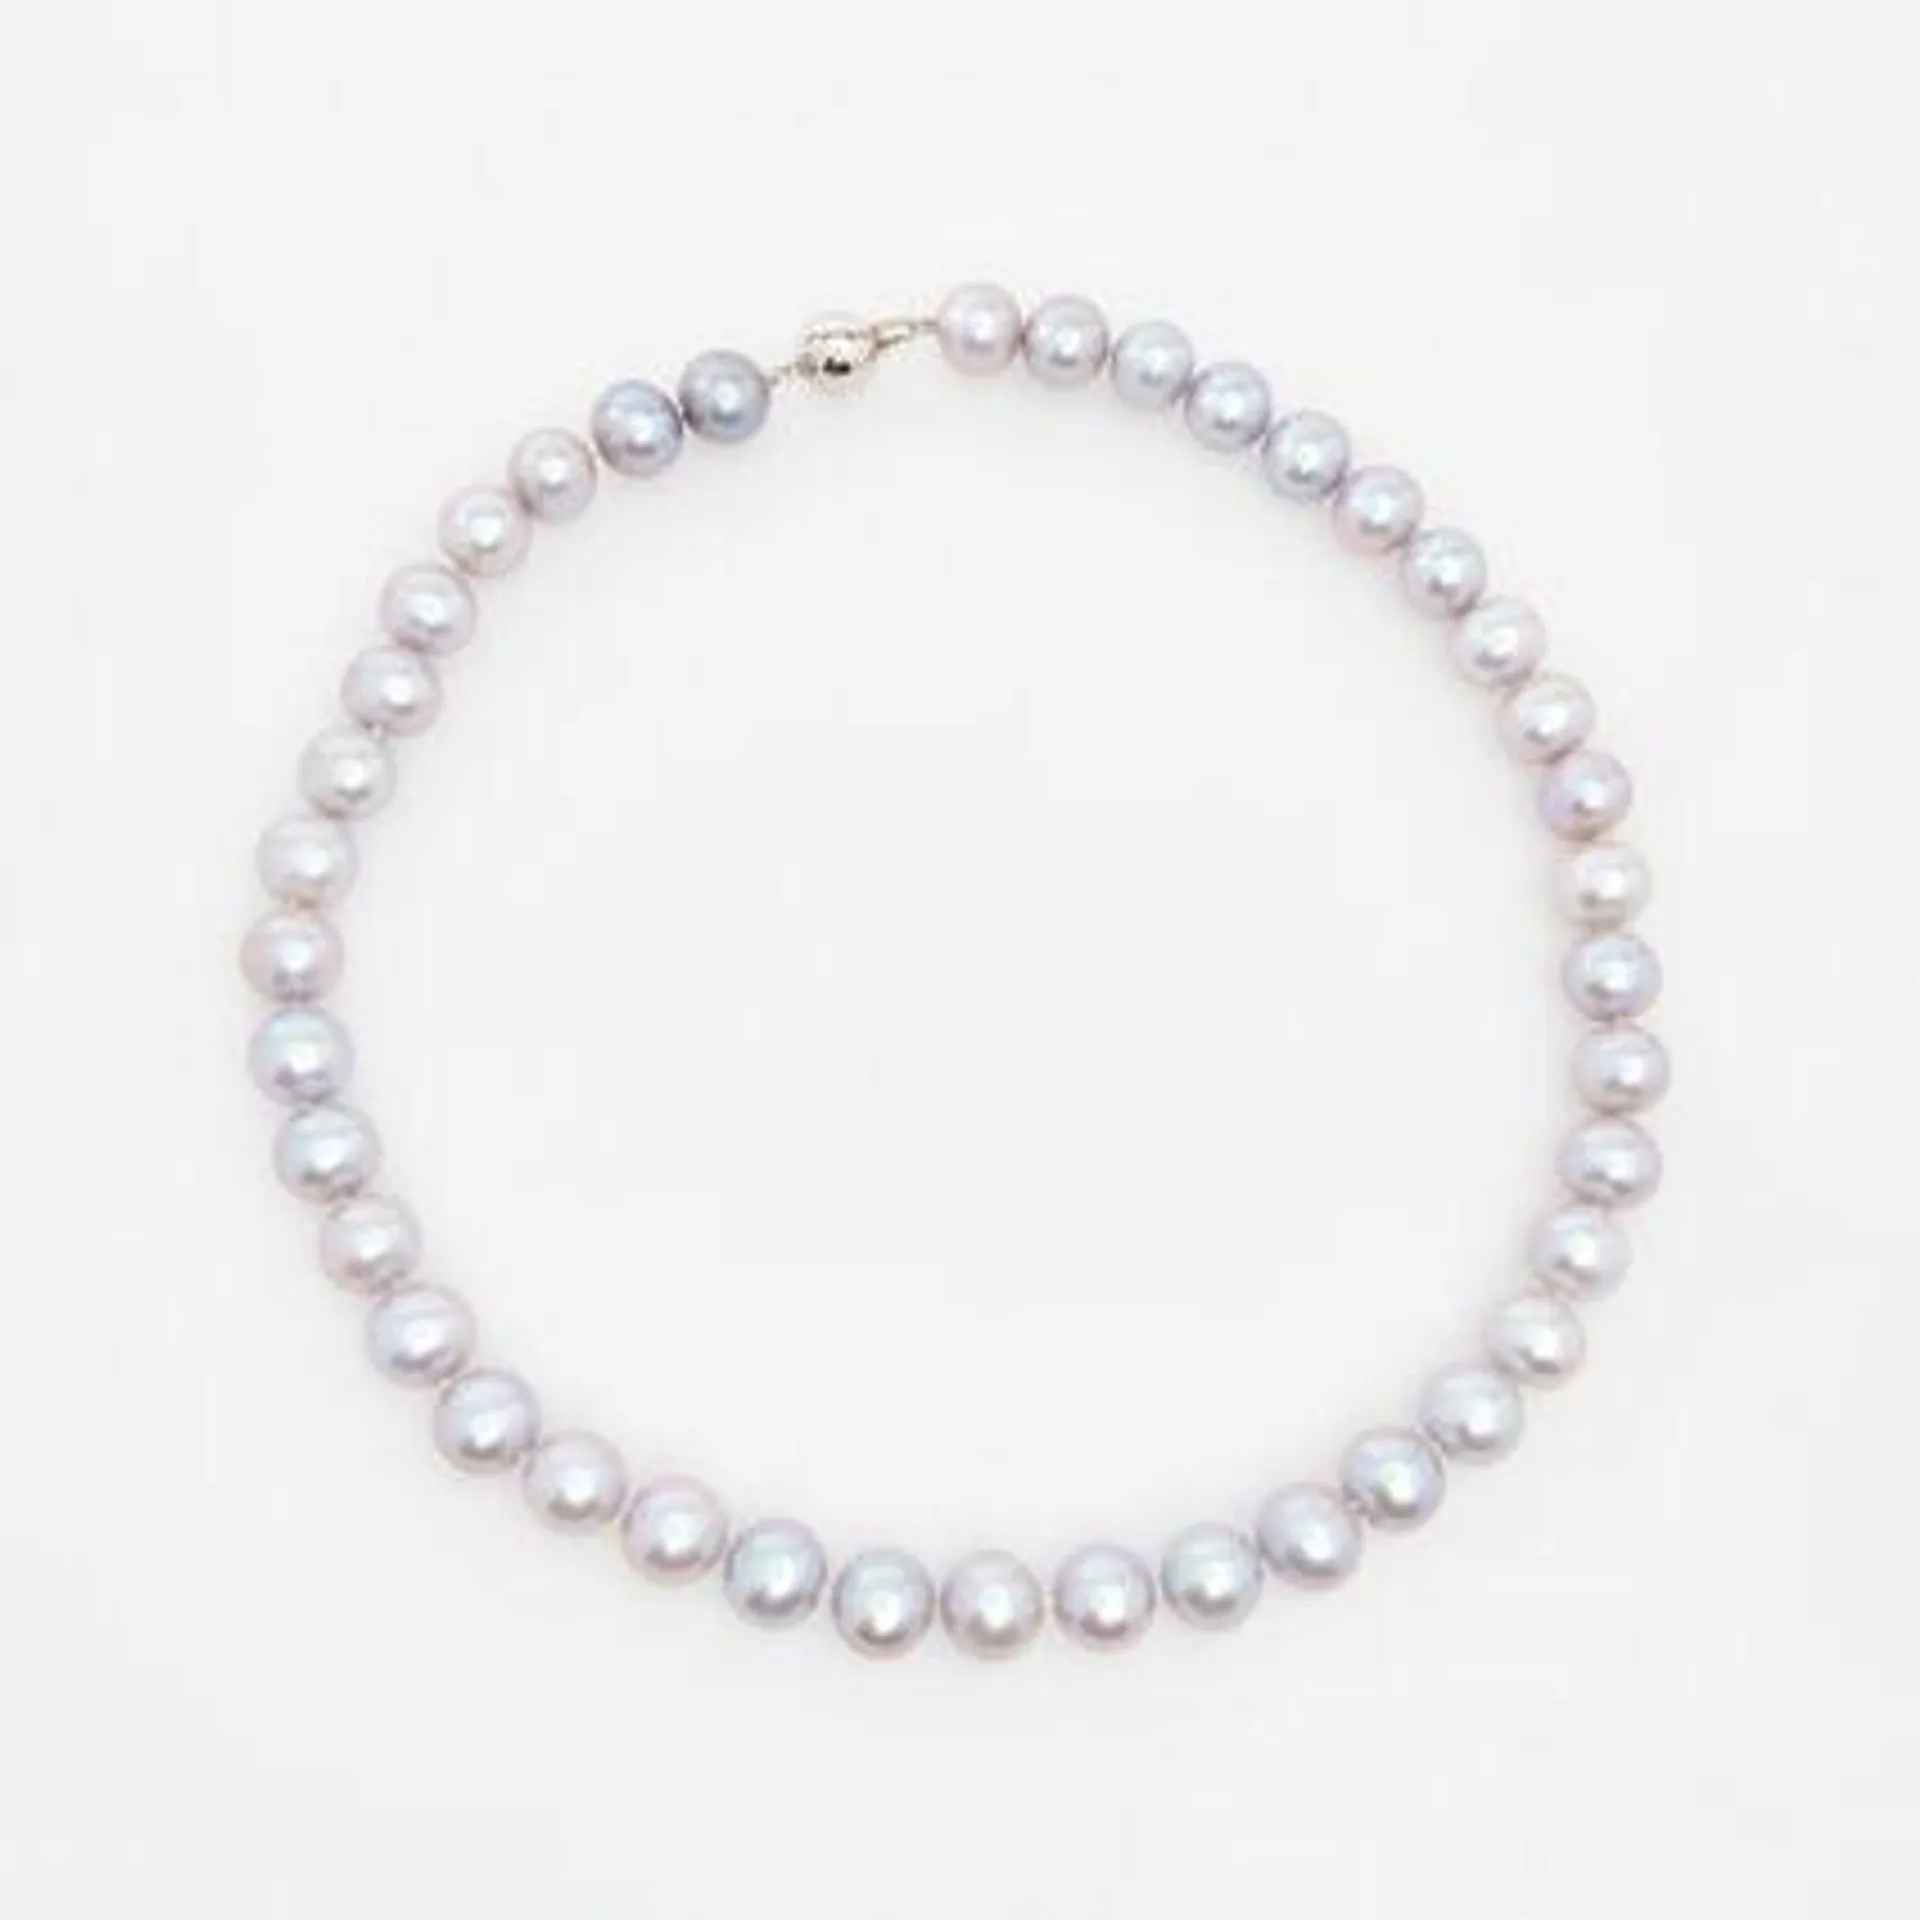 Silver Tone Pearl 9ct White Gold Necklace